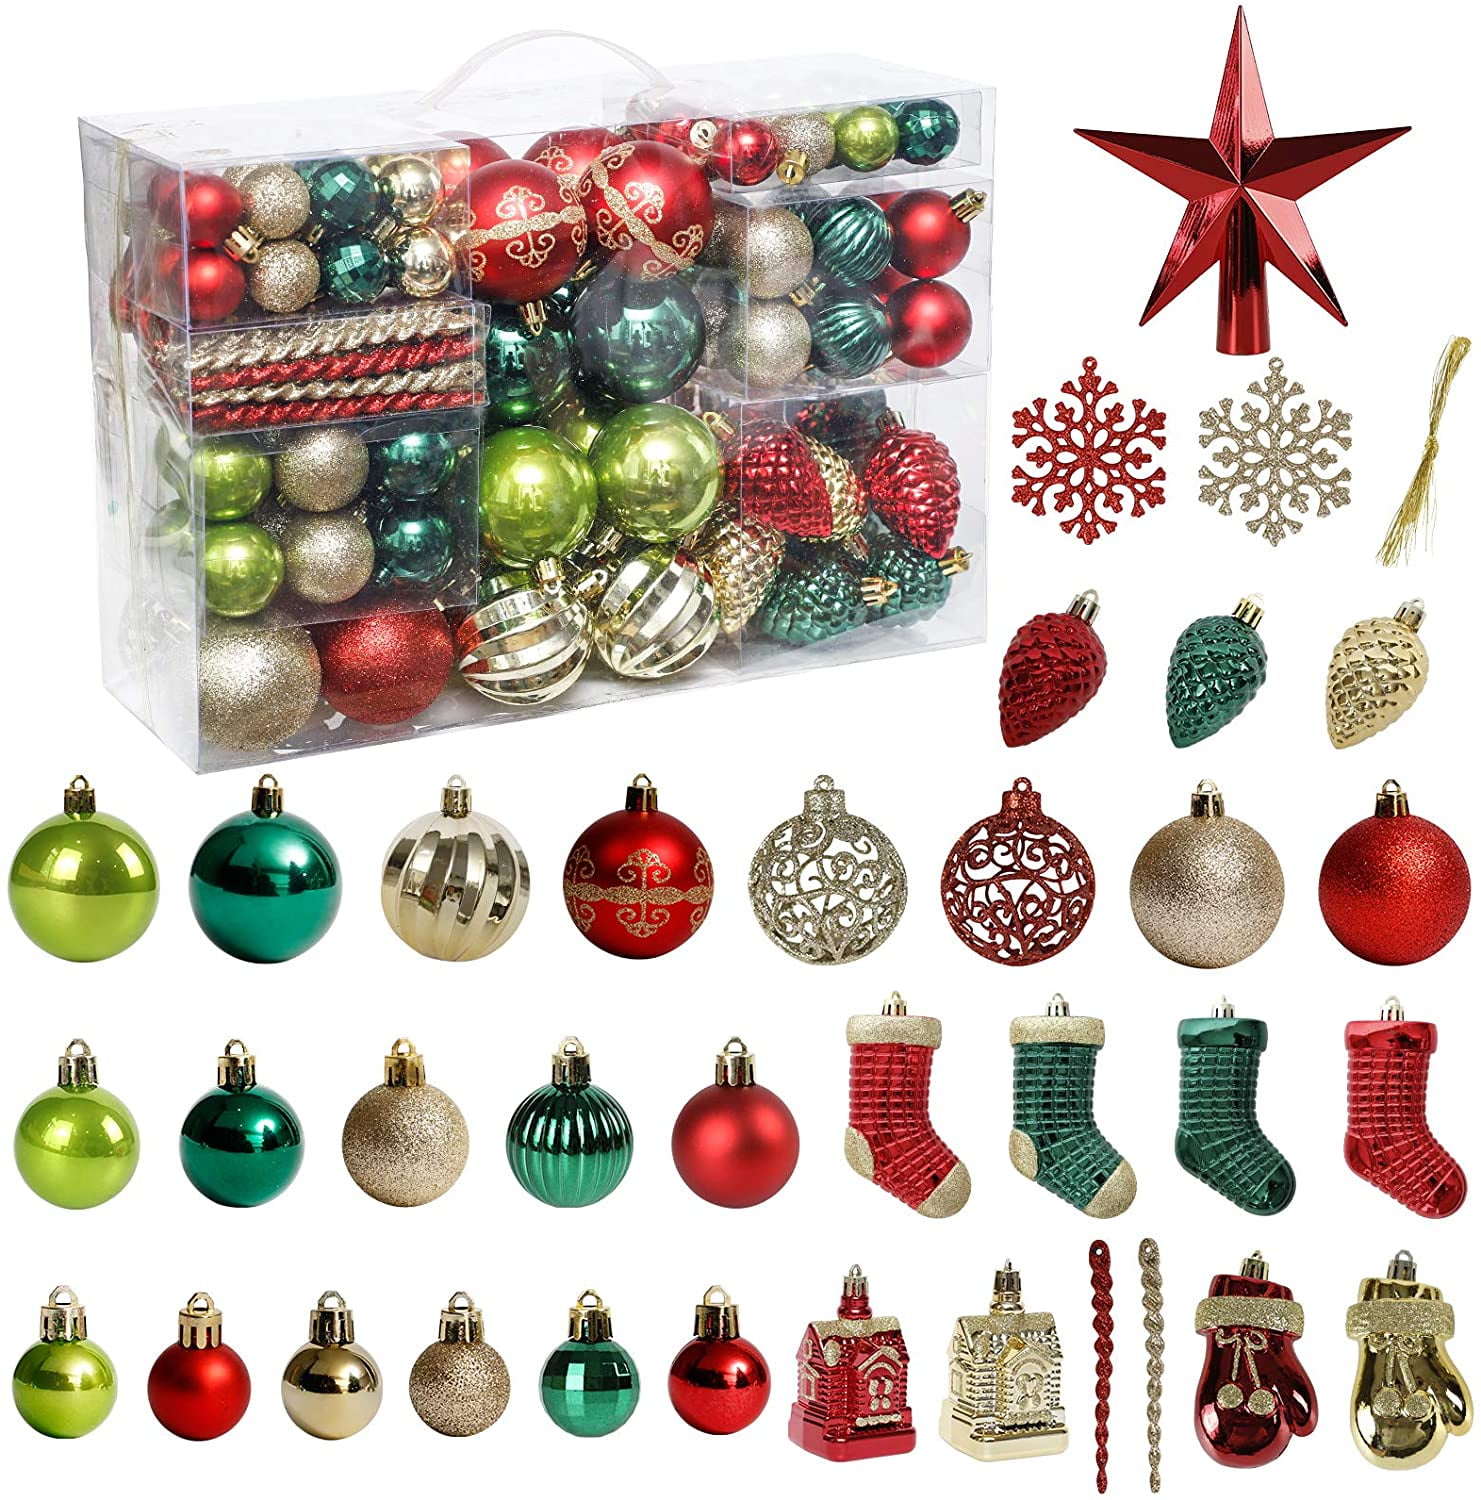 NEEDEED Christmas Ball Ornaments Tree Decorations ALL-IN-ONE Set Wire Warm White Lights 100 Bulbs Mini String Lights Set Everbuy include Decorative Baubles Pendants Set 47 pcs